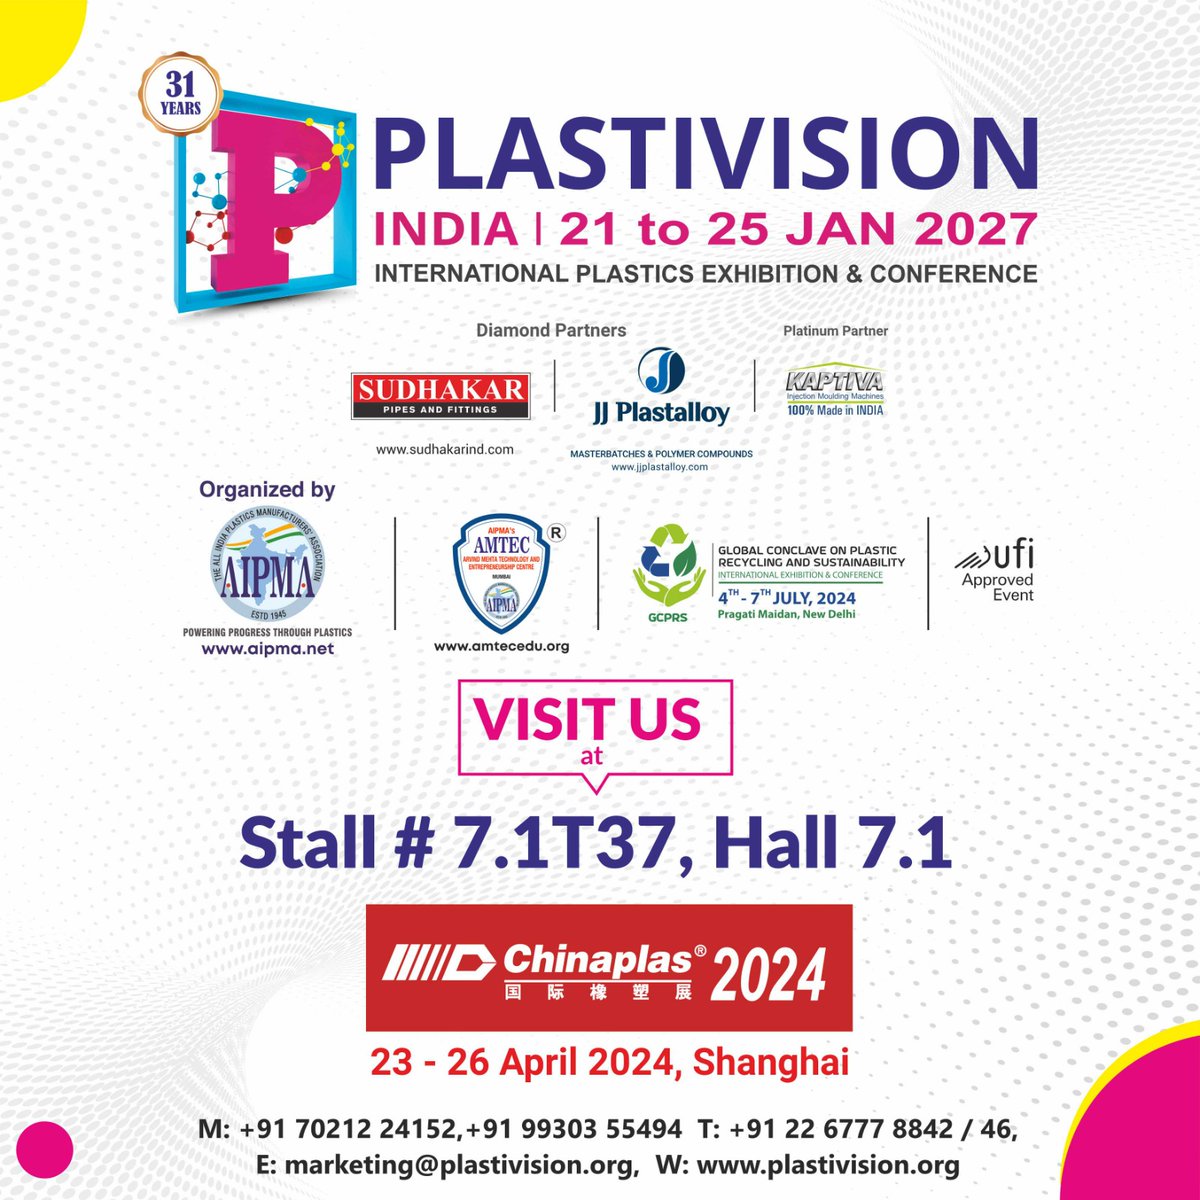 Plastivision India : Join us at Stall no 7.1 T37, Hall 7.1 from April 23rd to 26th in Shanghai, China.Chinaplas 2024.

Promoting Indian plastic sector to global audience

See you there!

#PlastivisionIndia #Chinaplas #Global #PlasticPositve